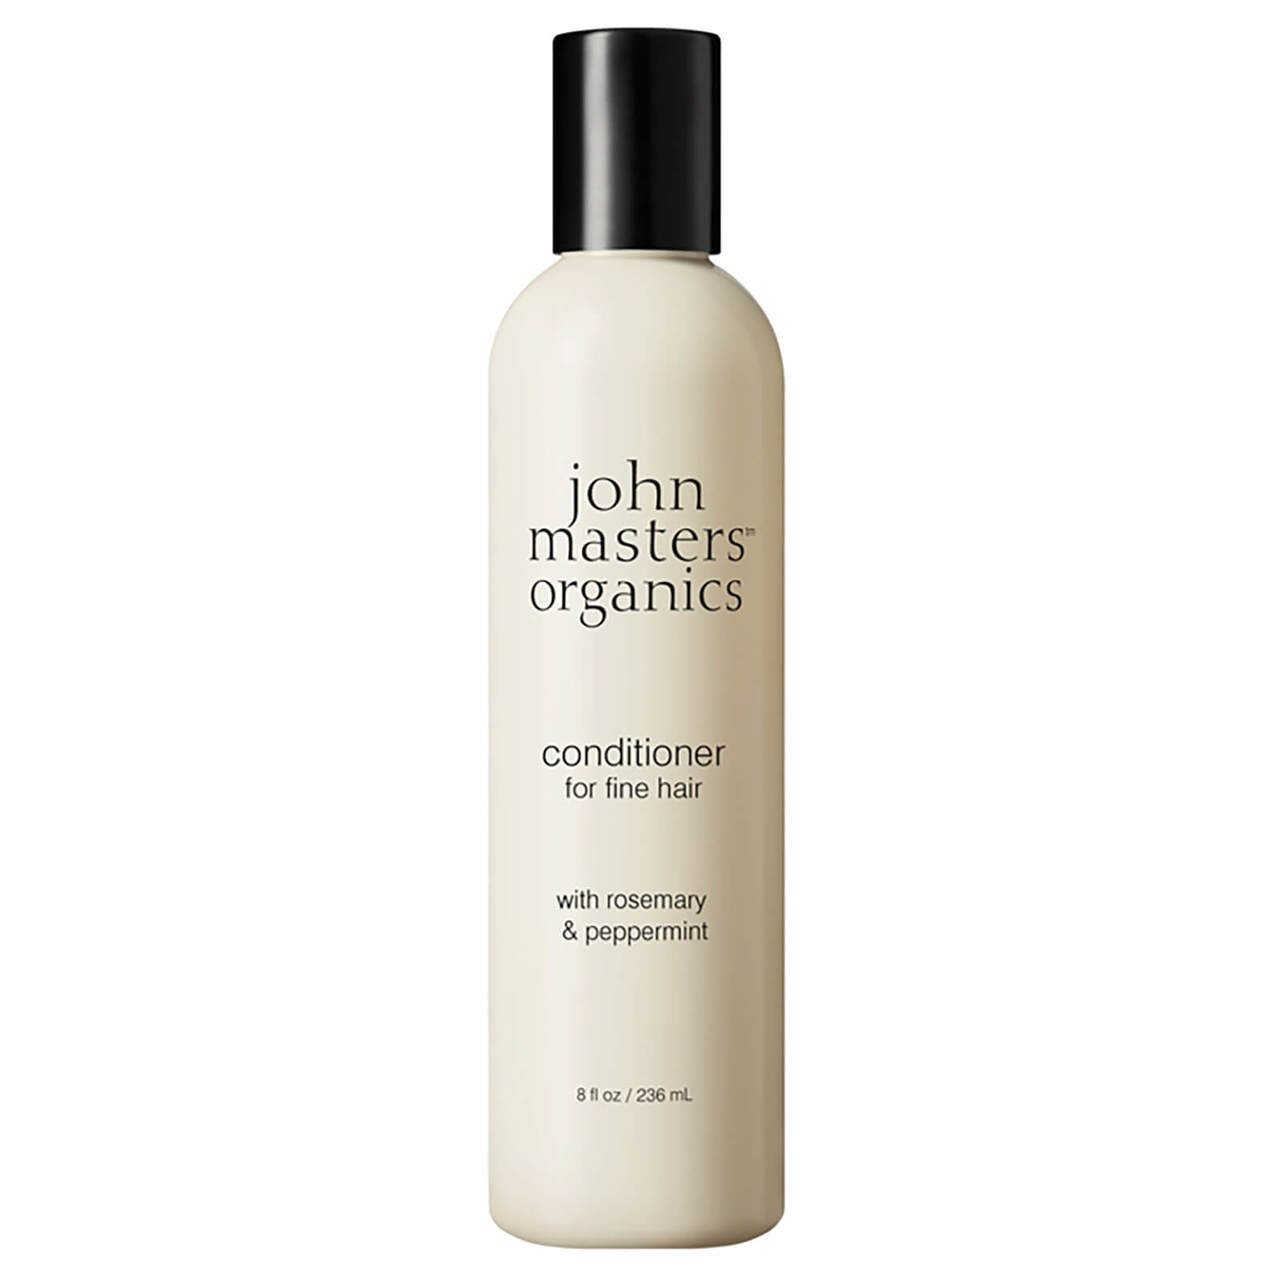 Rosemary & Peppermint Conditioner for Fine Hair by John Masters Organics